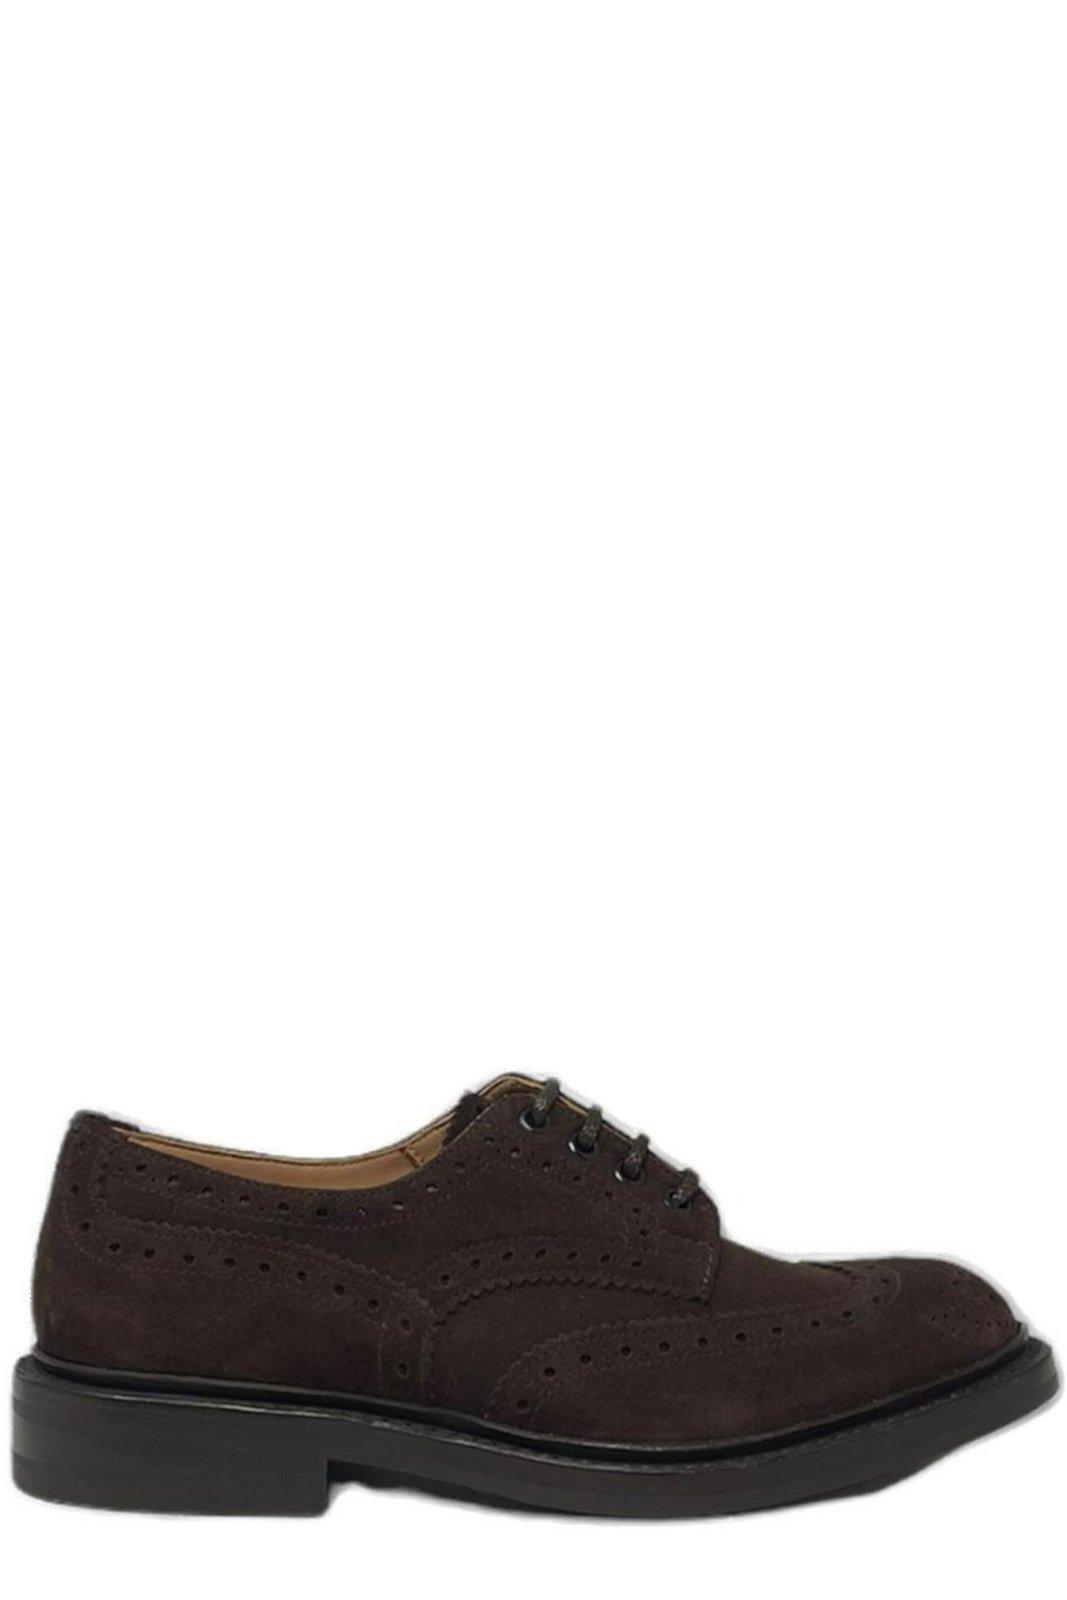 Trickers Leather Brogues Bourton in Brown for Men Mens Shoes Lace-ups Brogues 